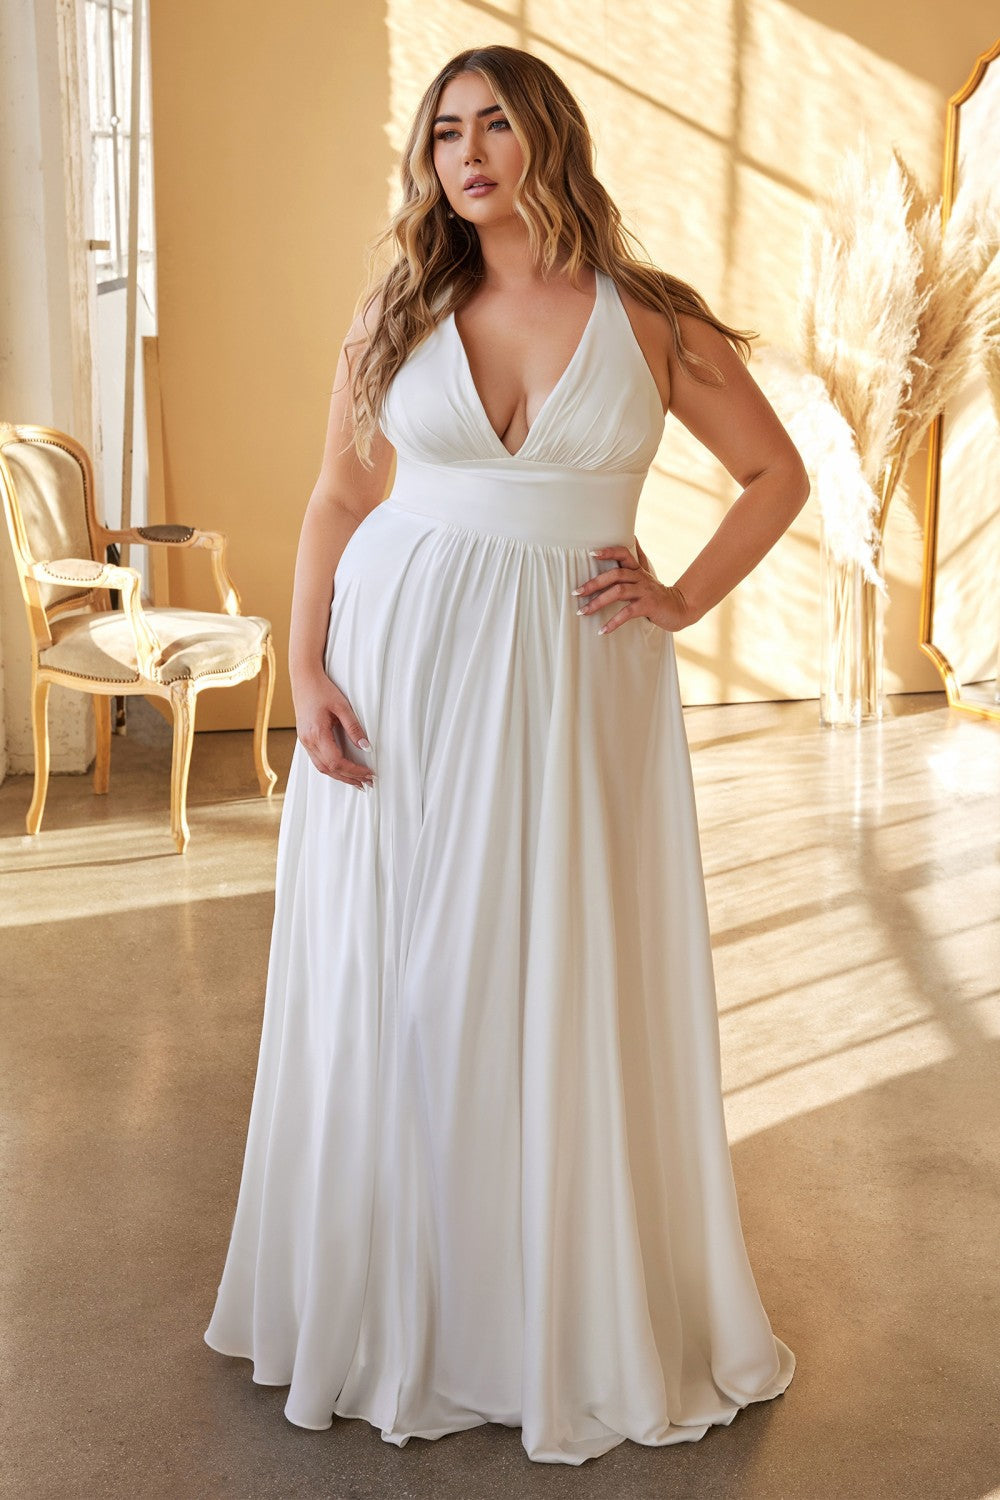 Plus Size Classic Soft a-line dress Curvy Bridal Dress Fitted Bodice Wedding Ceremony Gown Tender Skirt with High Leg Slit CD7469WW Elsy Style Wedding Dress